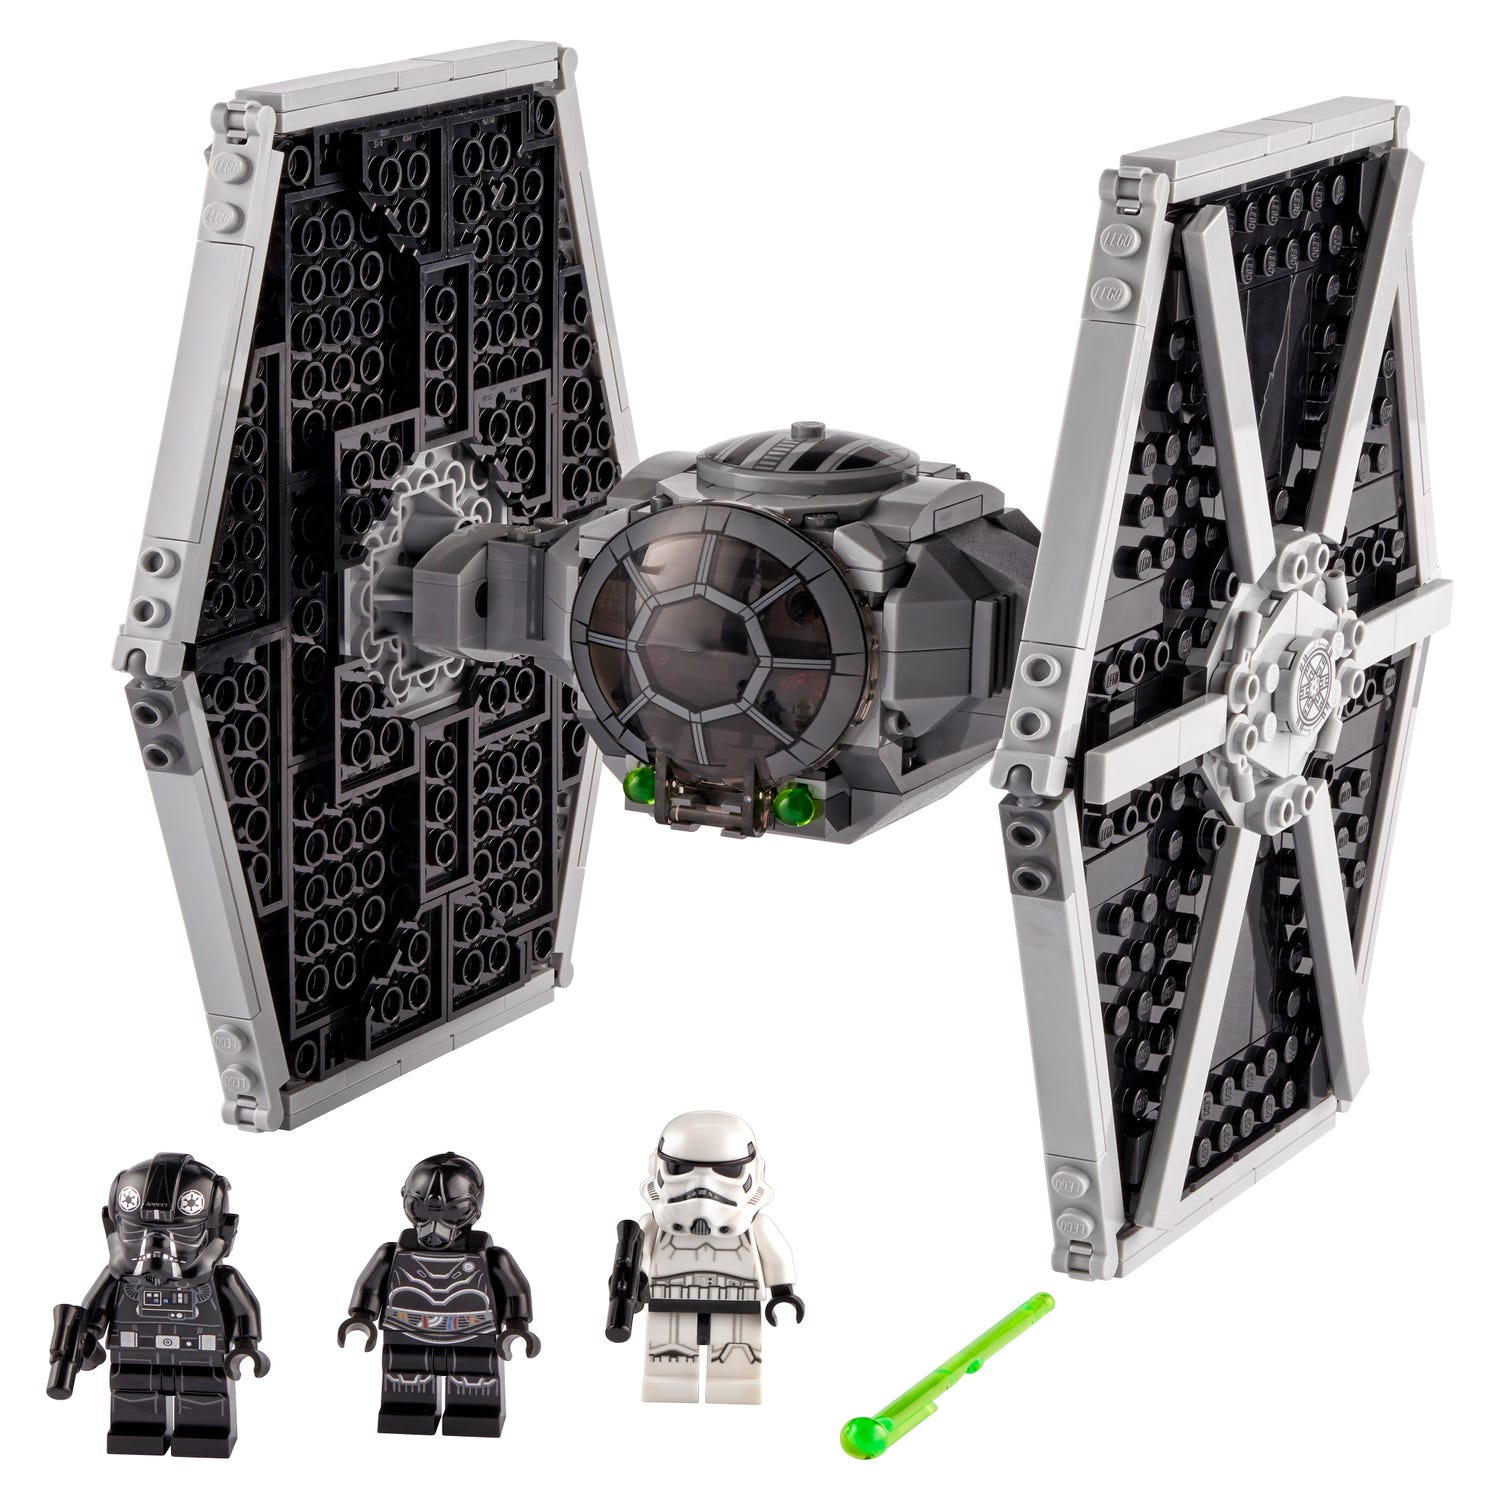 Lego Star Wars TIE Fighter (75300) : les offres